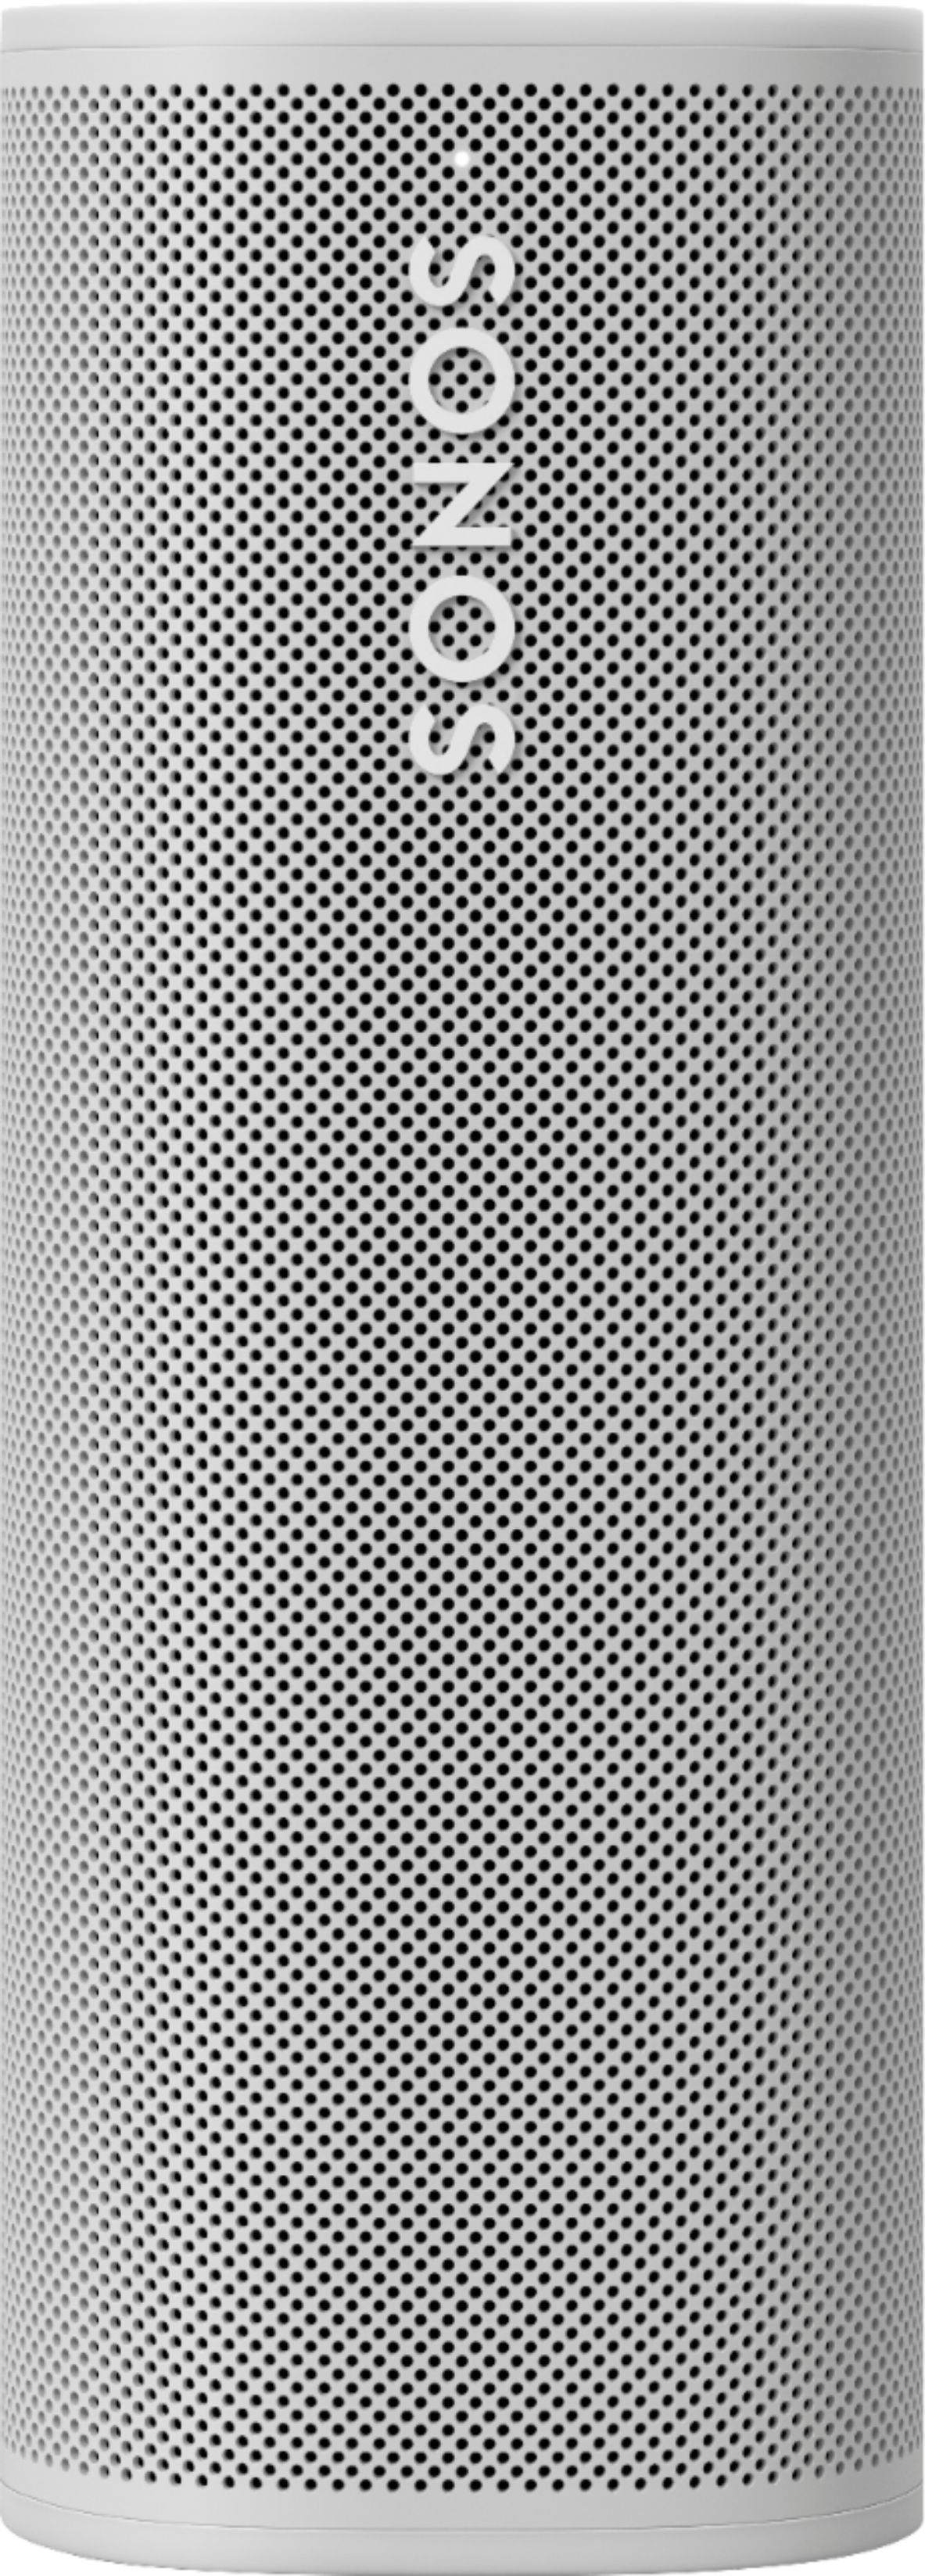 Angle View: Sonos - Geek Squad Certified Refurbished Roam Smart Portable Wi-Fi and Bluetooth Speaker with Amazon Alexa and Google Assistant - Lunar White